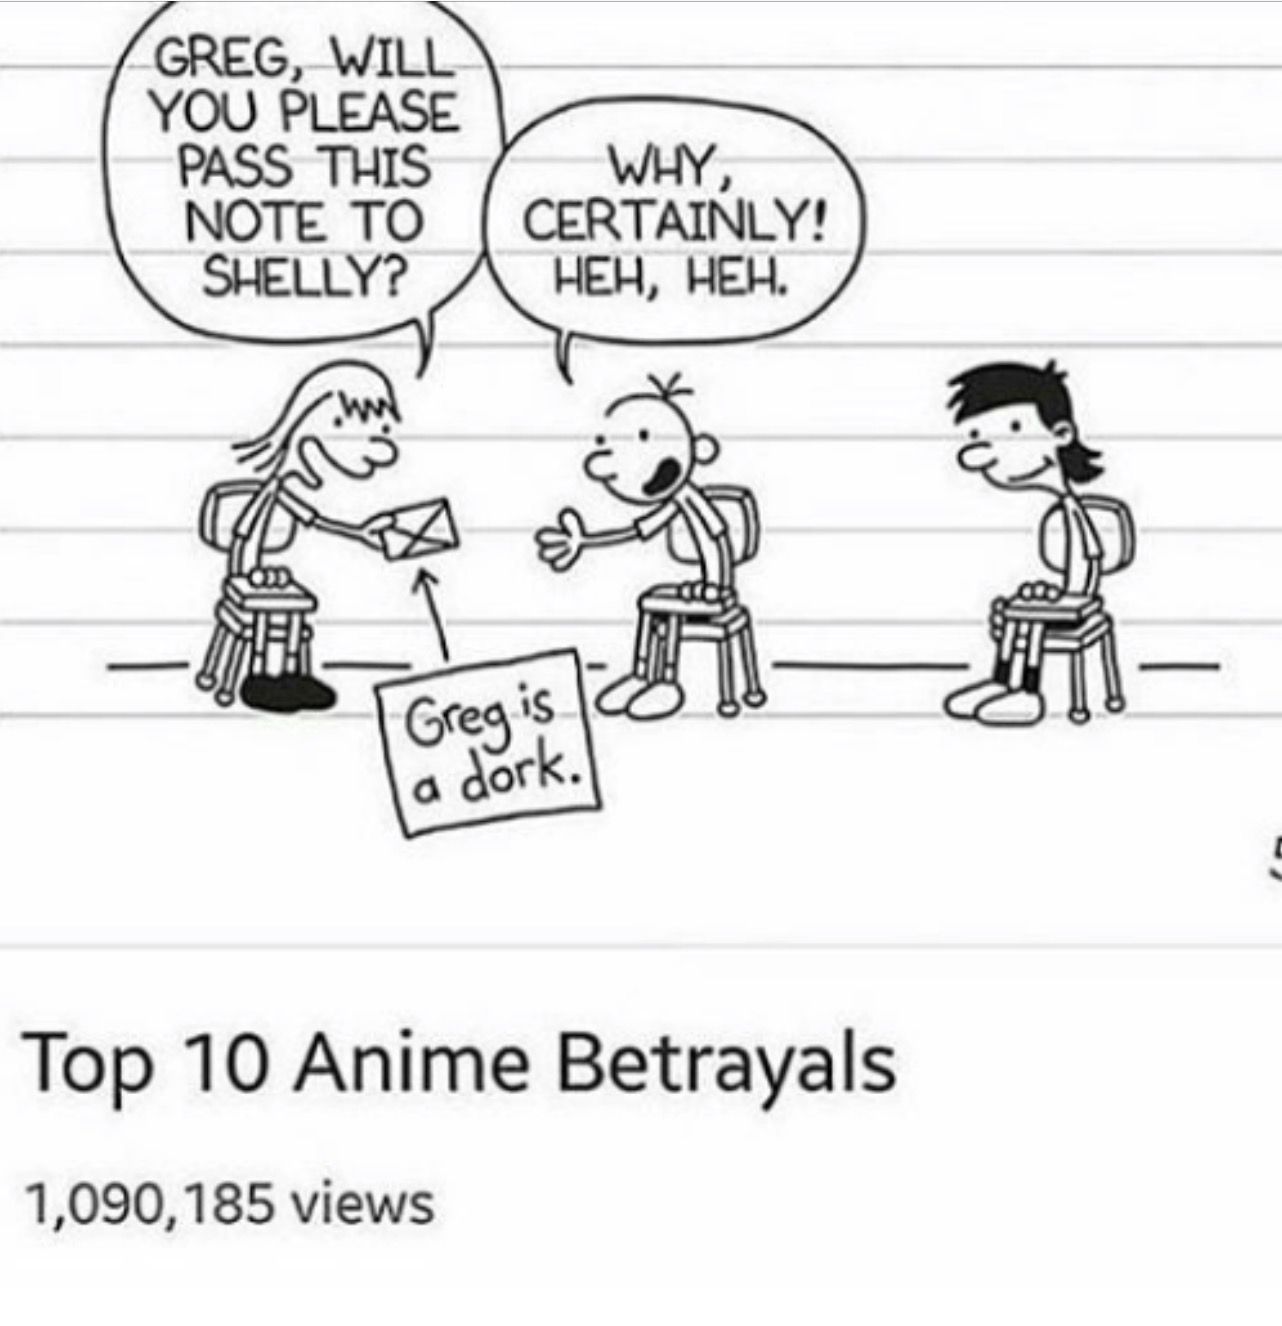 Greg Heffley Passes A Note In The Anime Betrayal Format